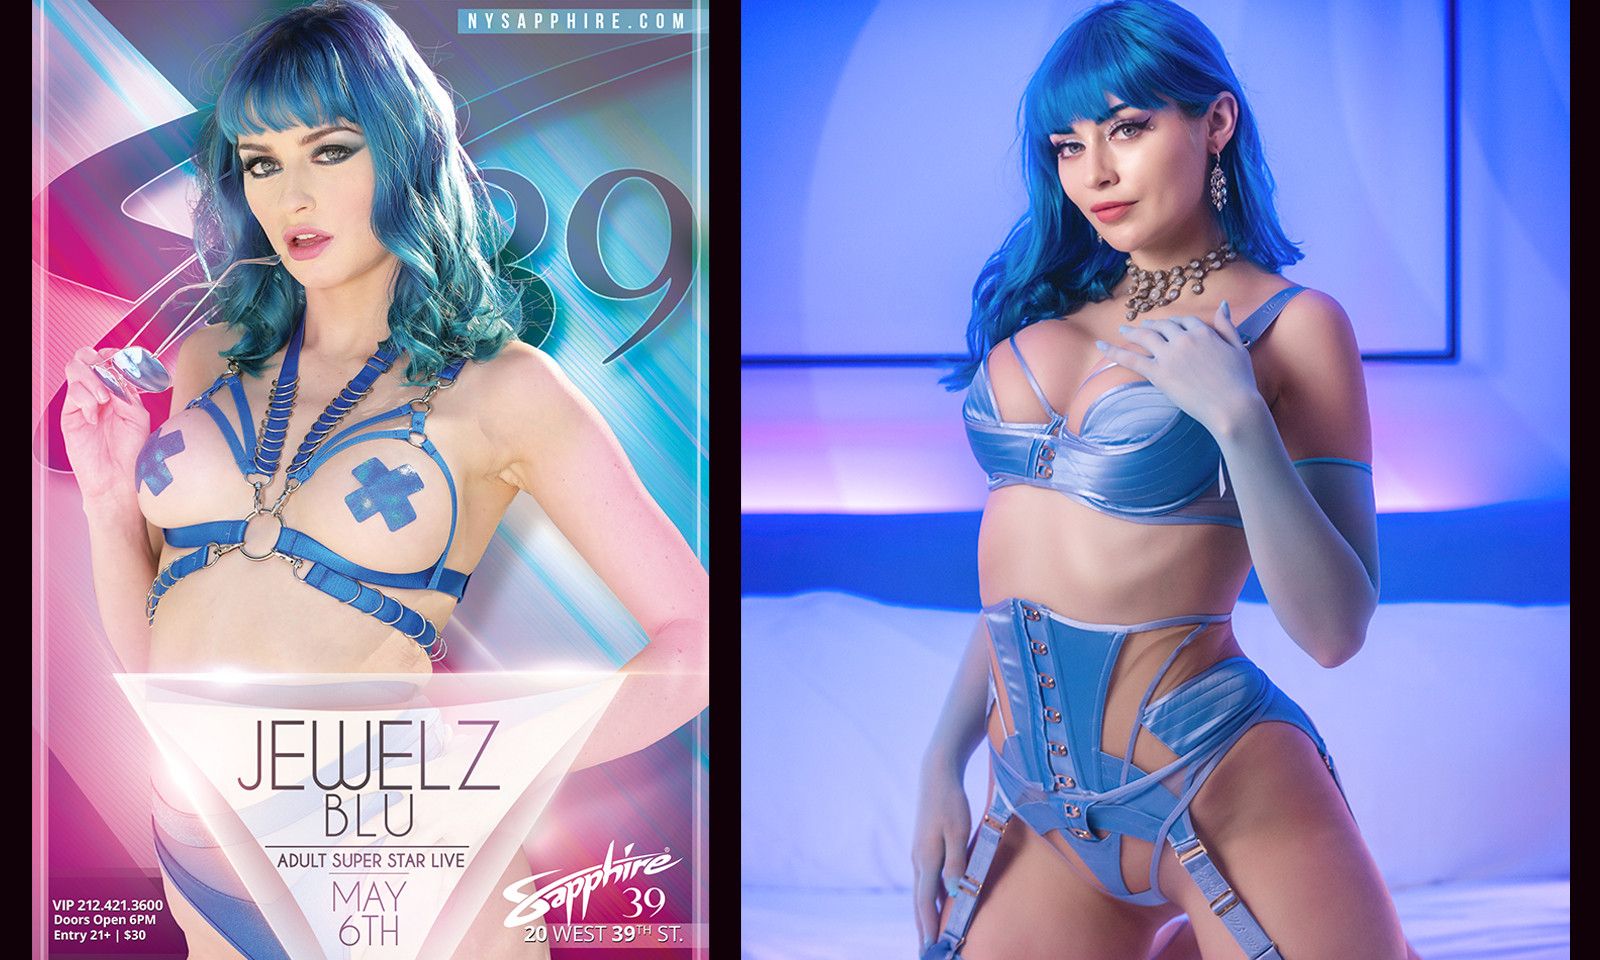 Jewelz Blu Makes Her Feature Dancing Debut Tonight at Sapphire 39